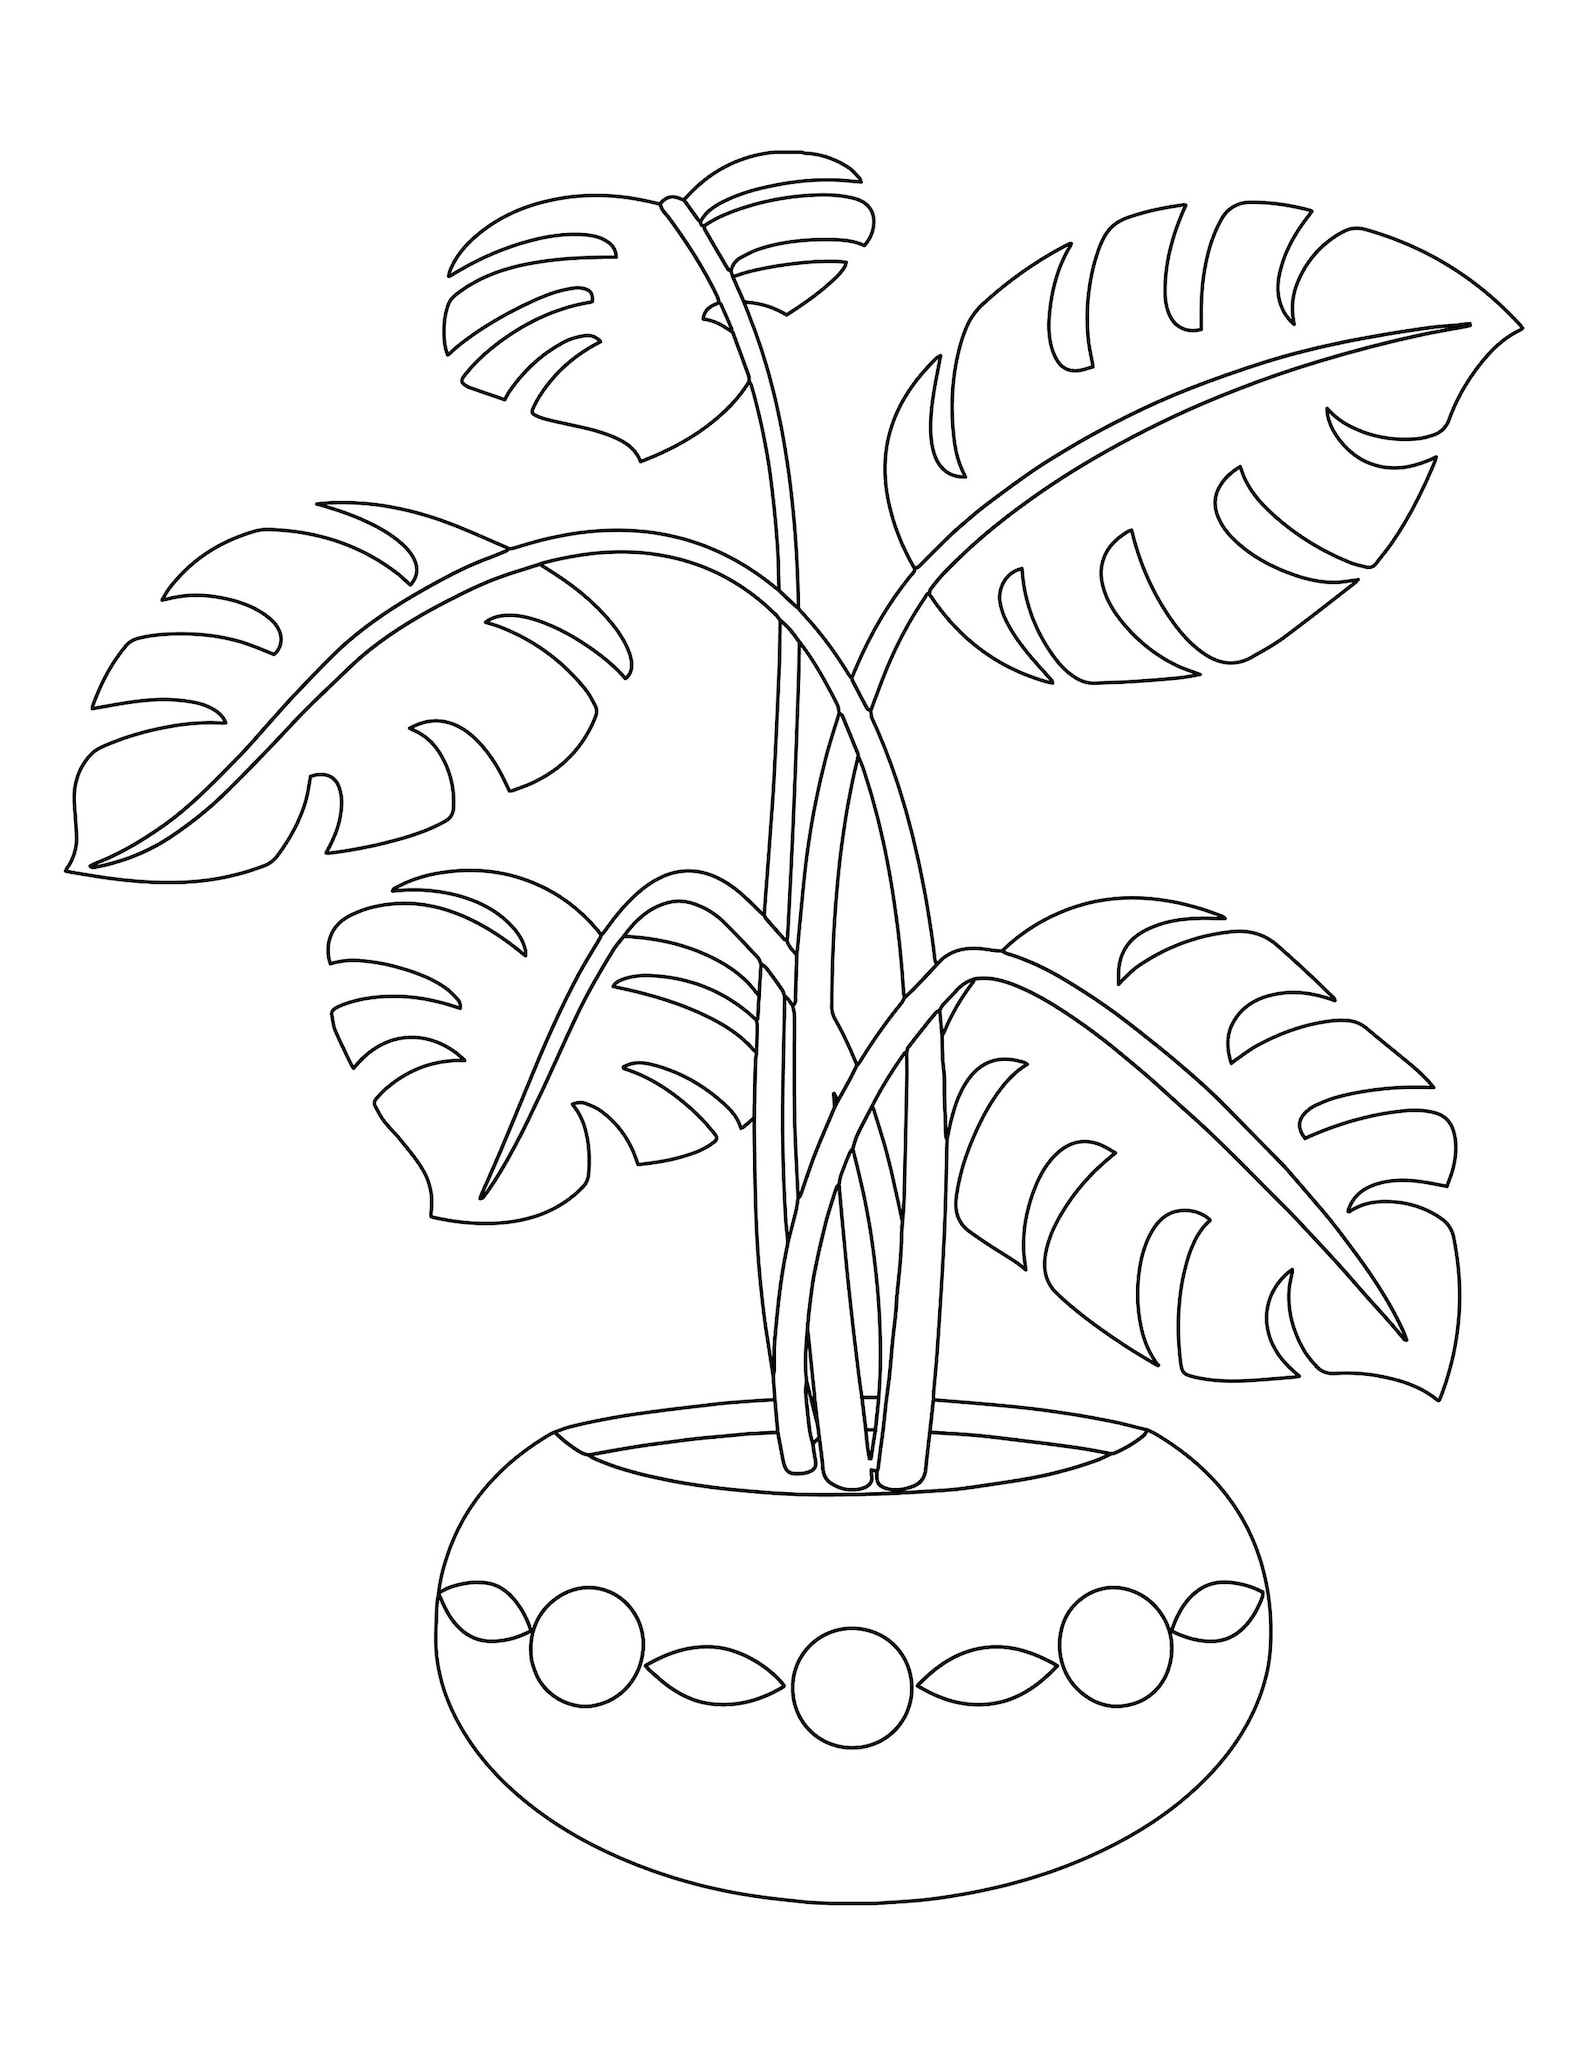 plant-colouring-in-page-etsy